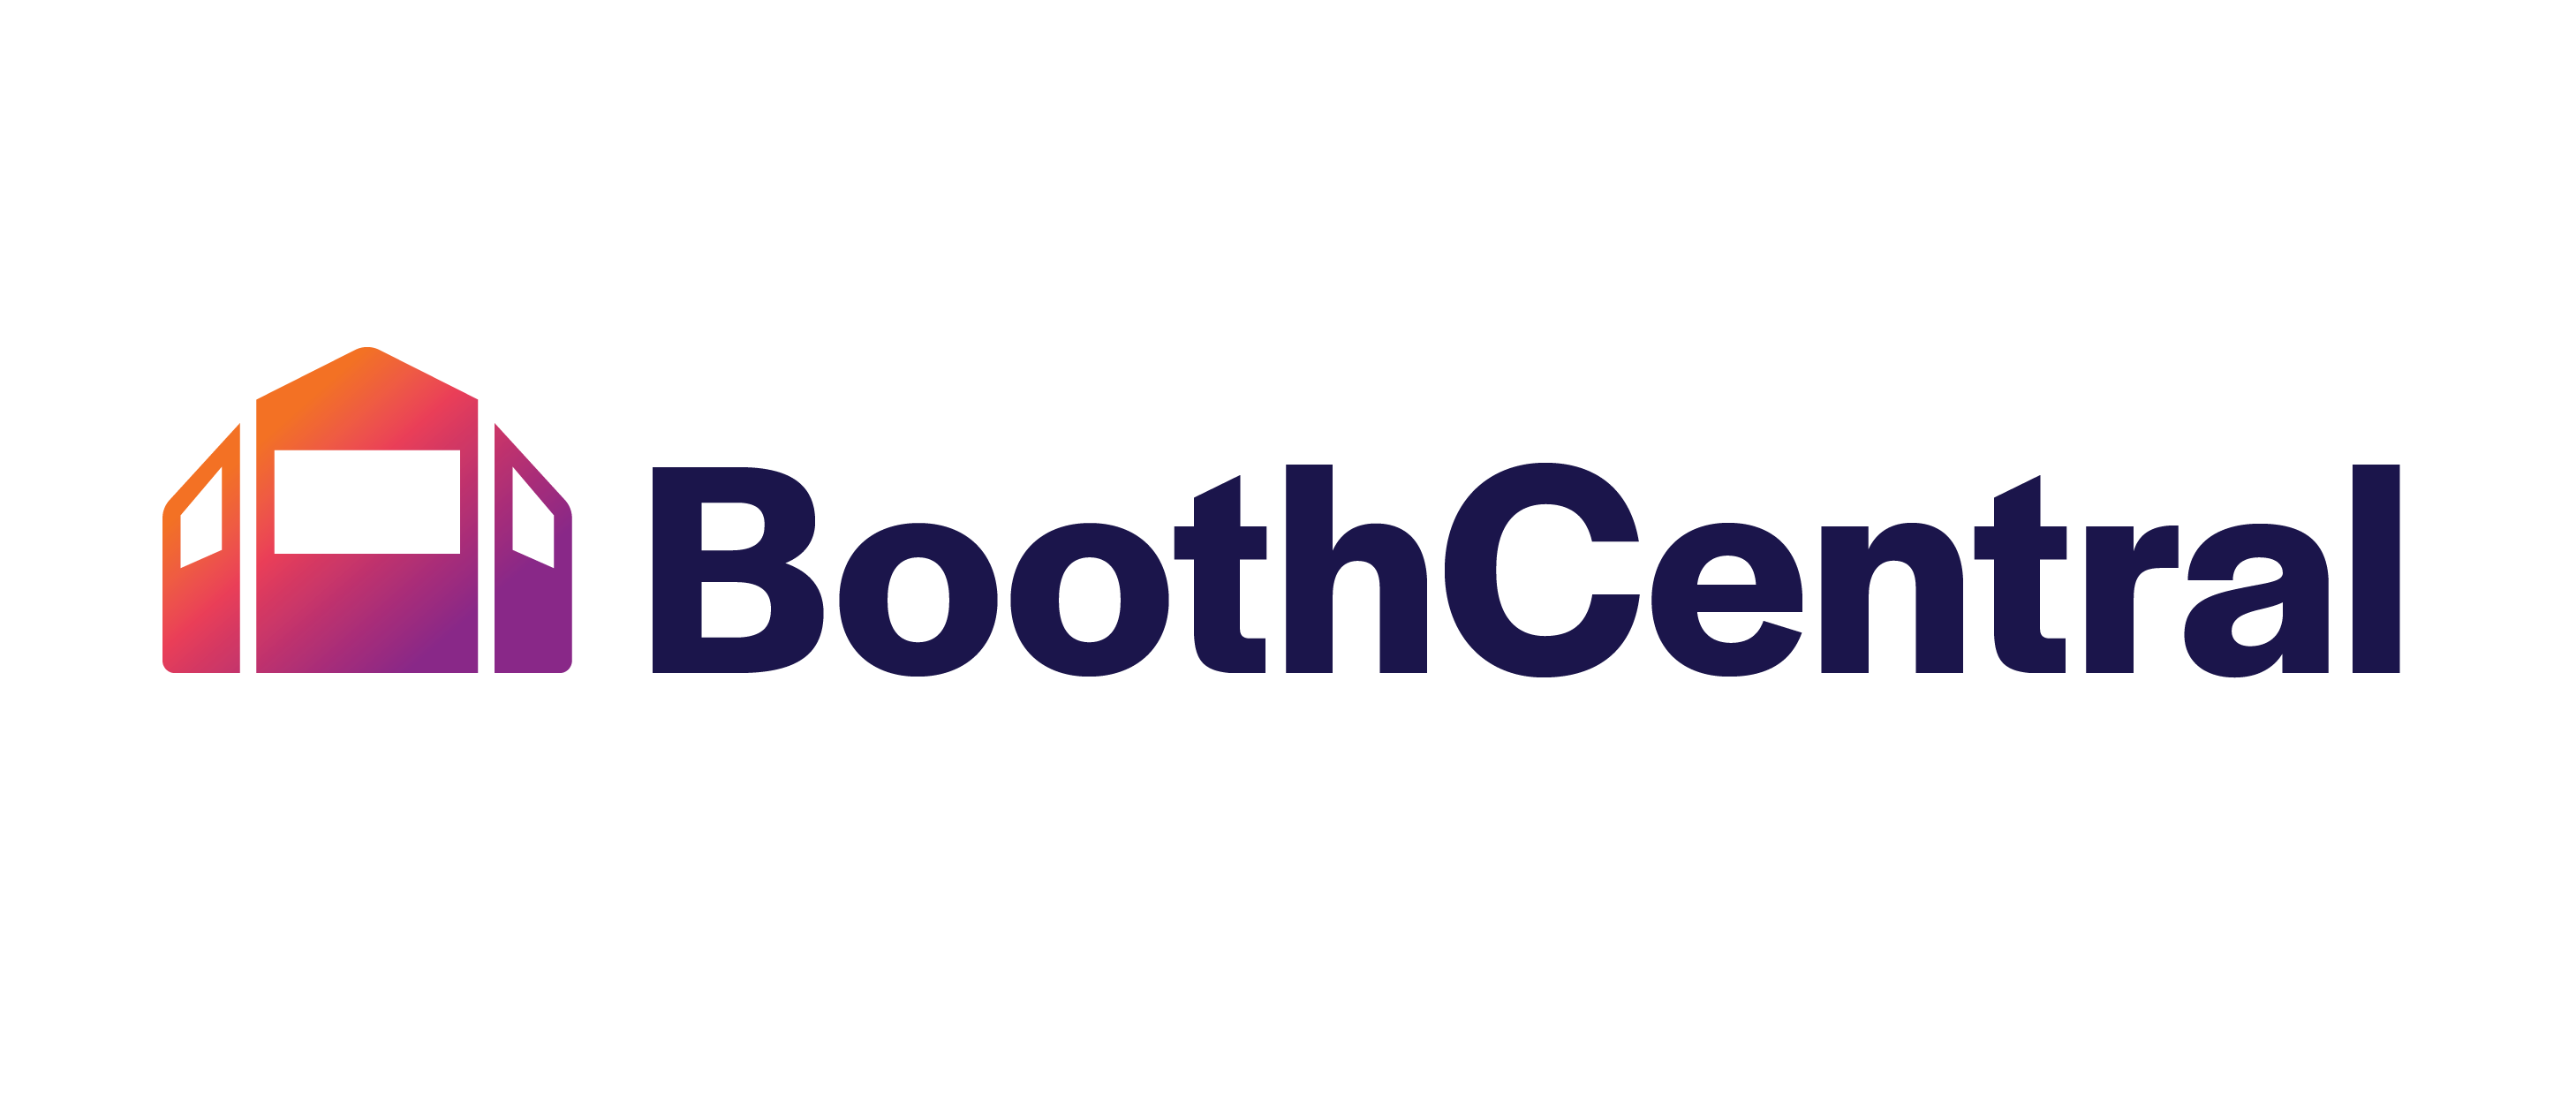 BoothCentral Logo